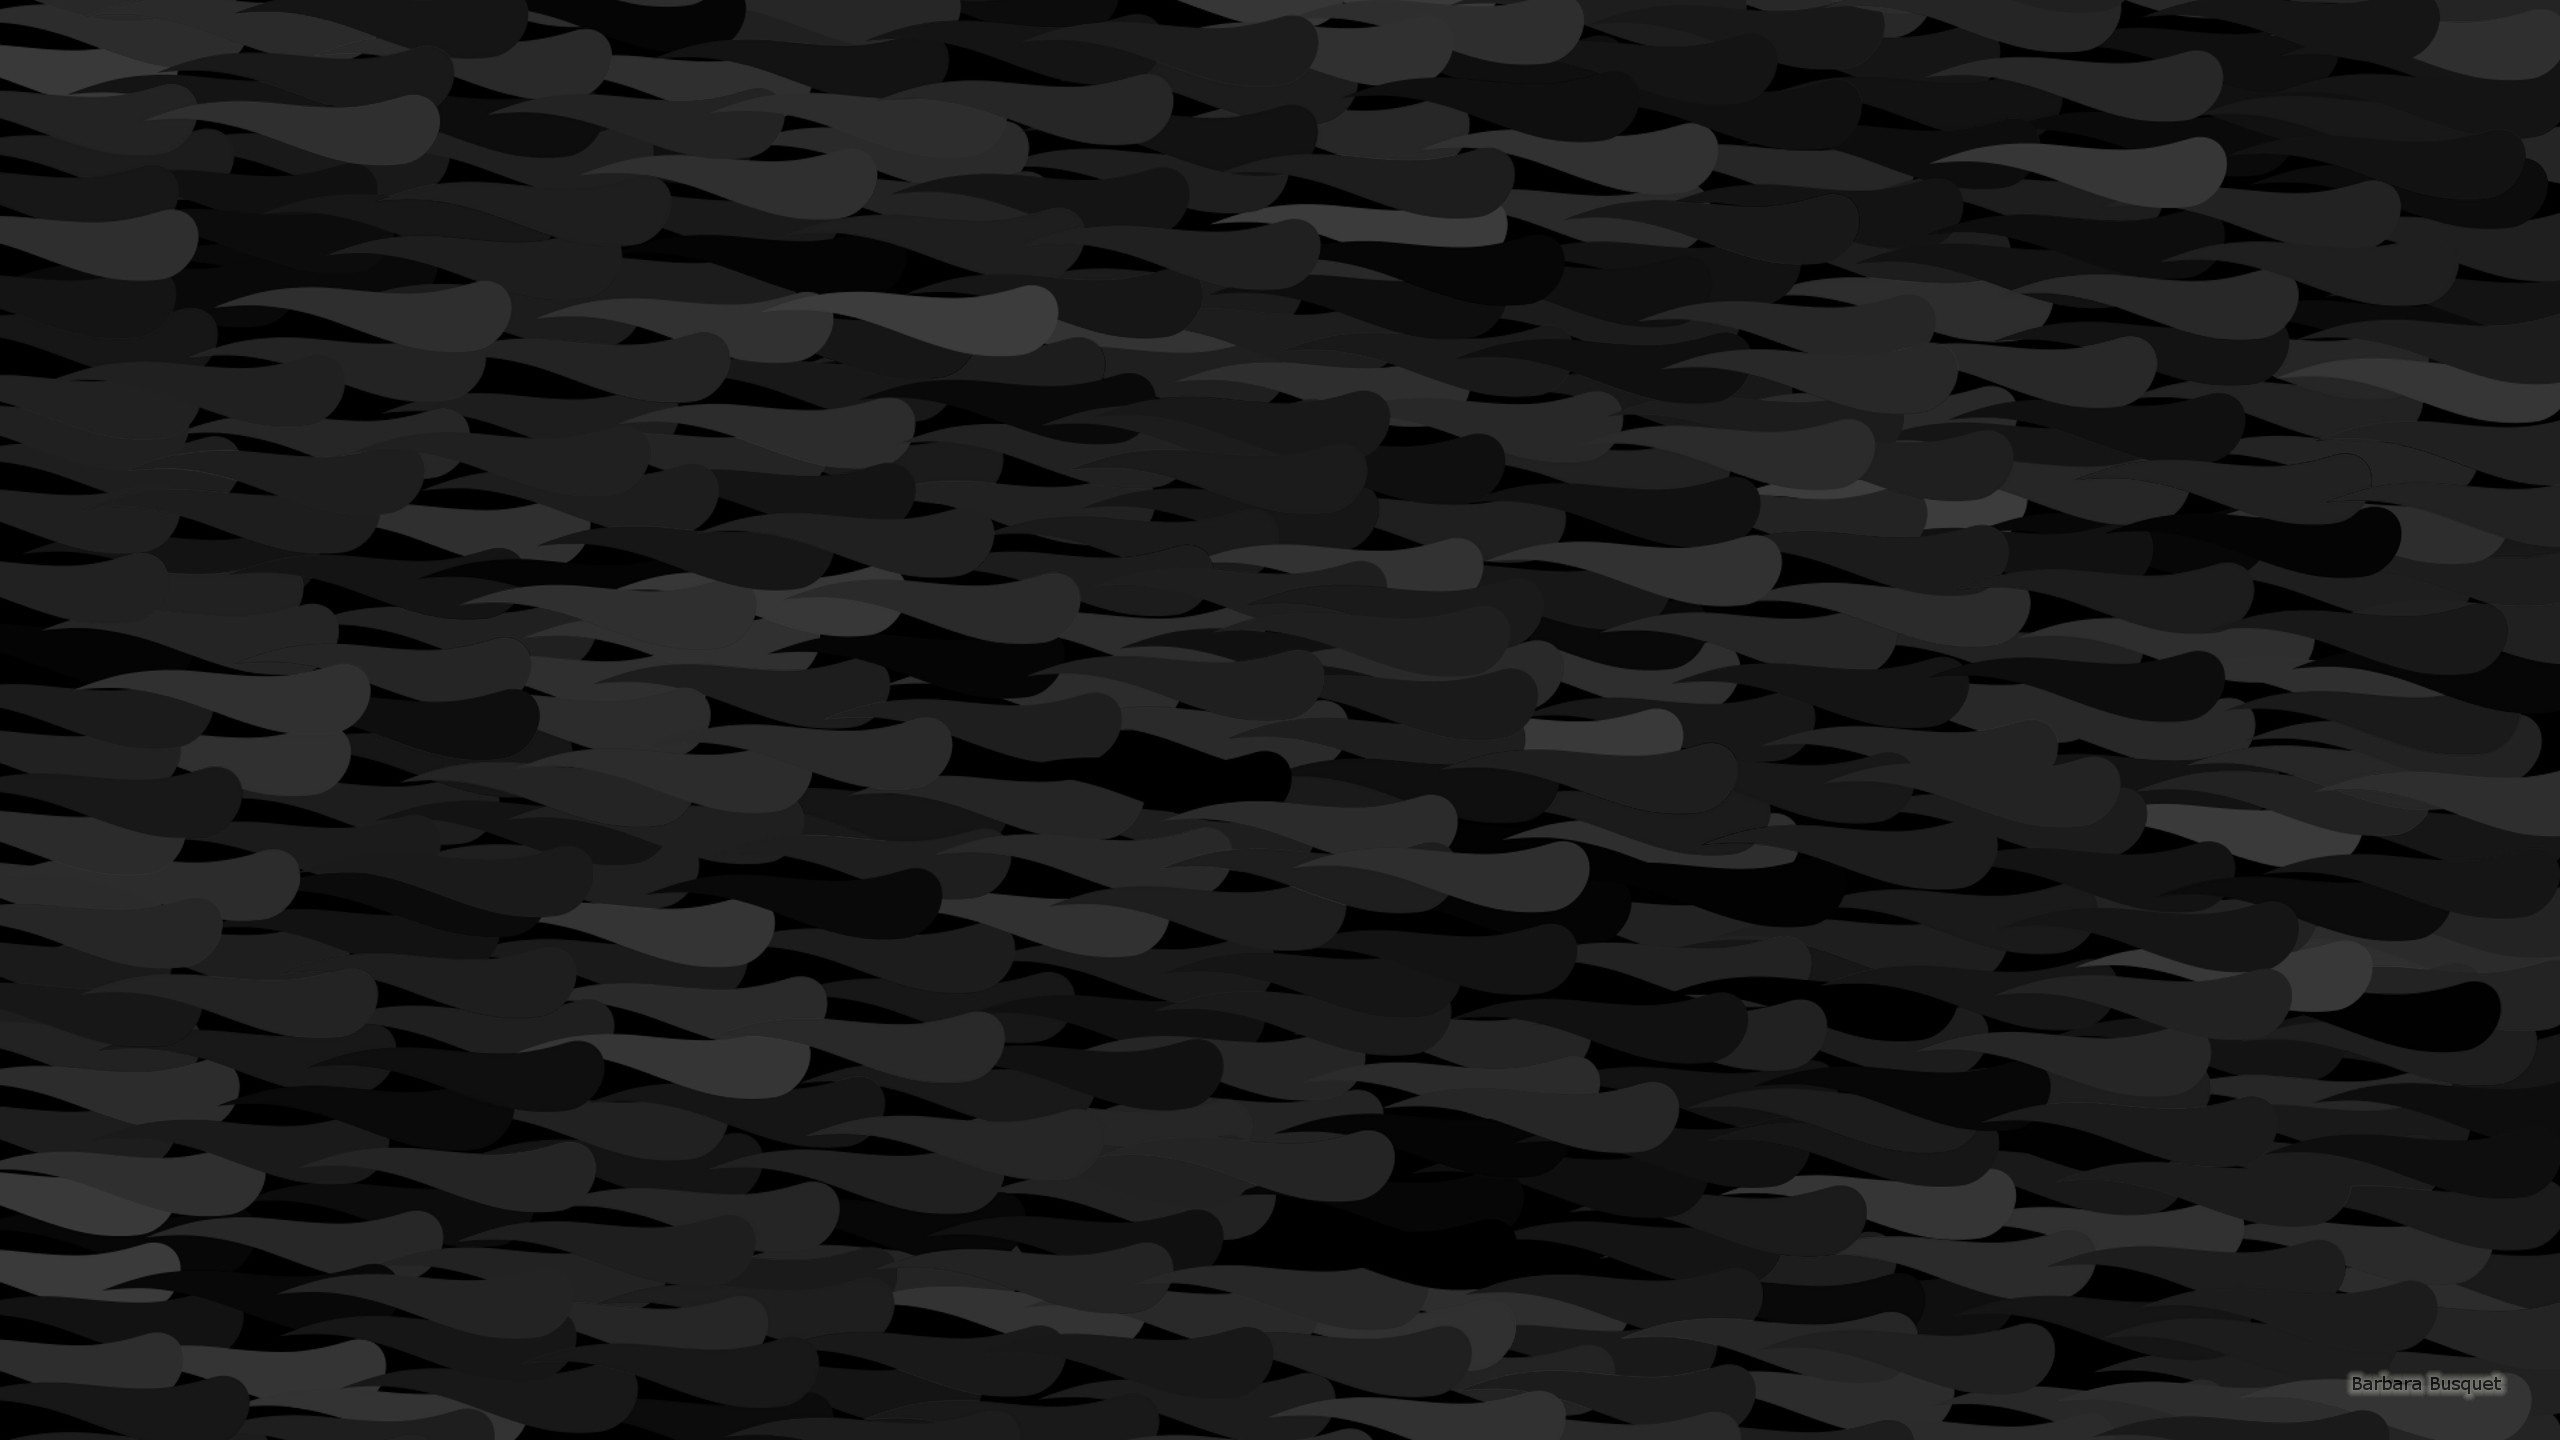 Black abstract wallpaper with dark gray shapes